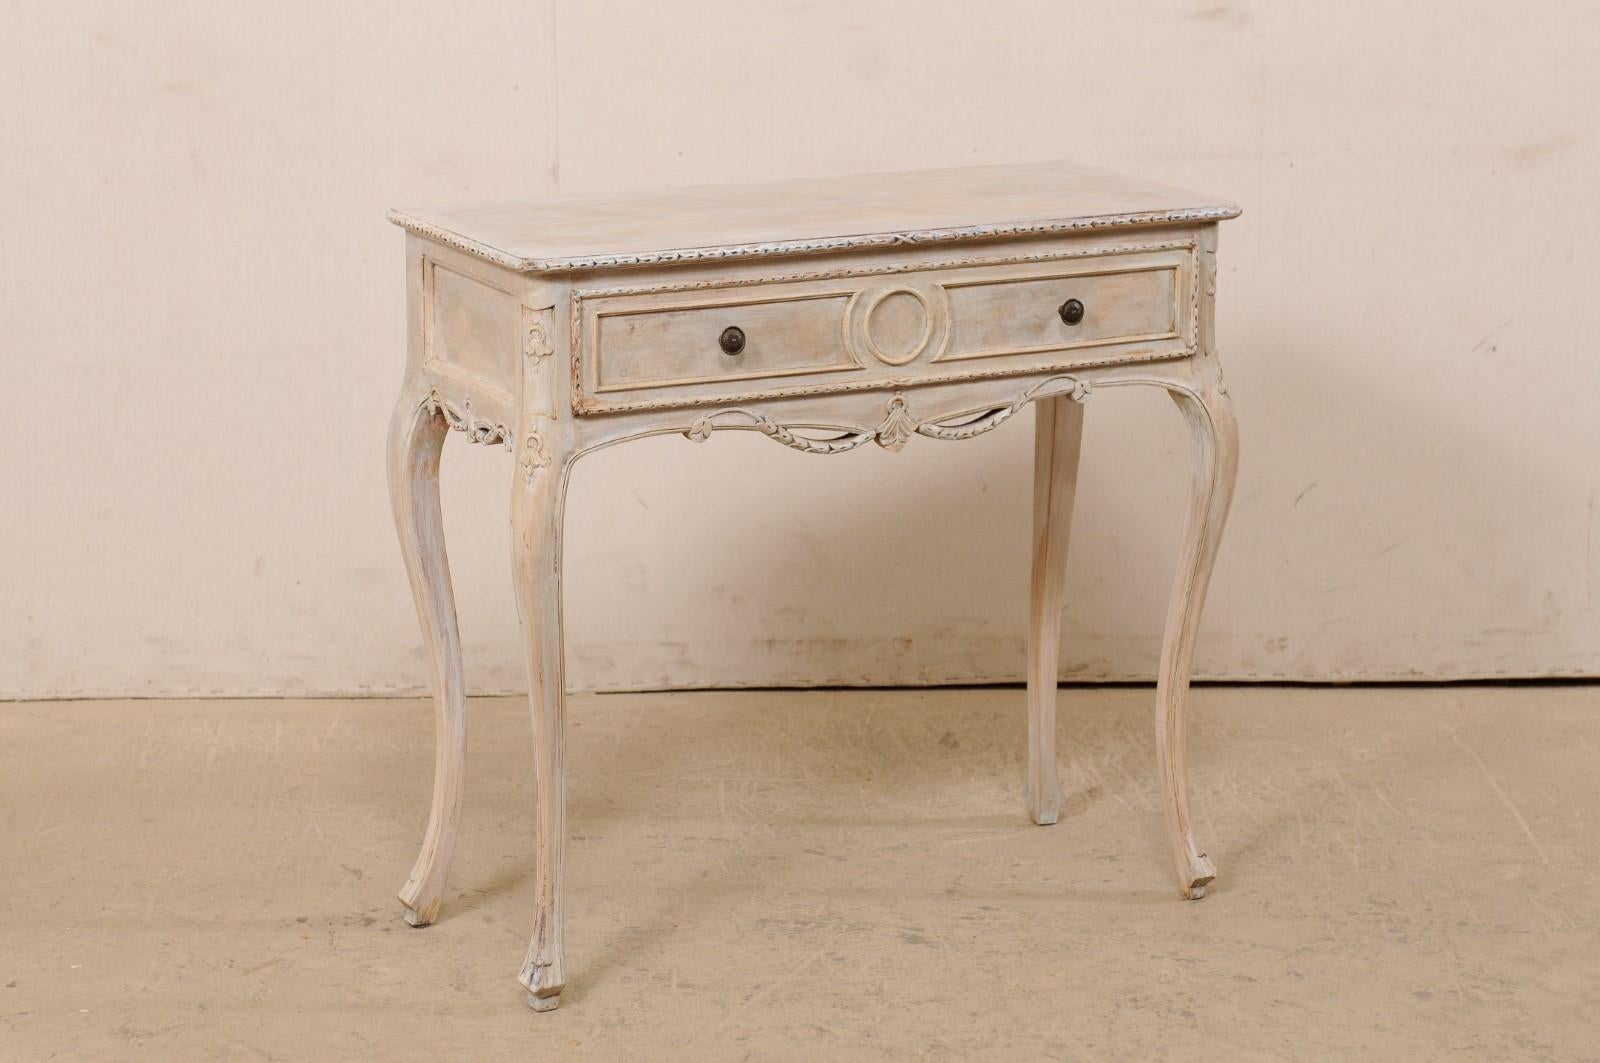 An Italian petite sized console table with single drawer from the mid 20th century. This vintage side table from Italy features a rectangular-shaped top with nicely carved and curved edges, which rests atop an apron which houses a single and